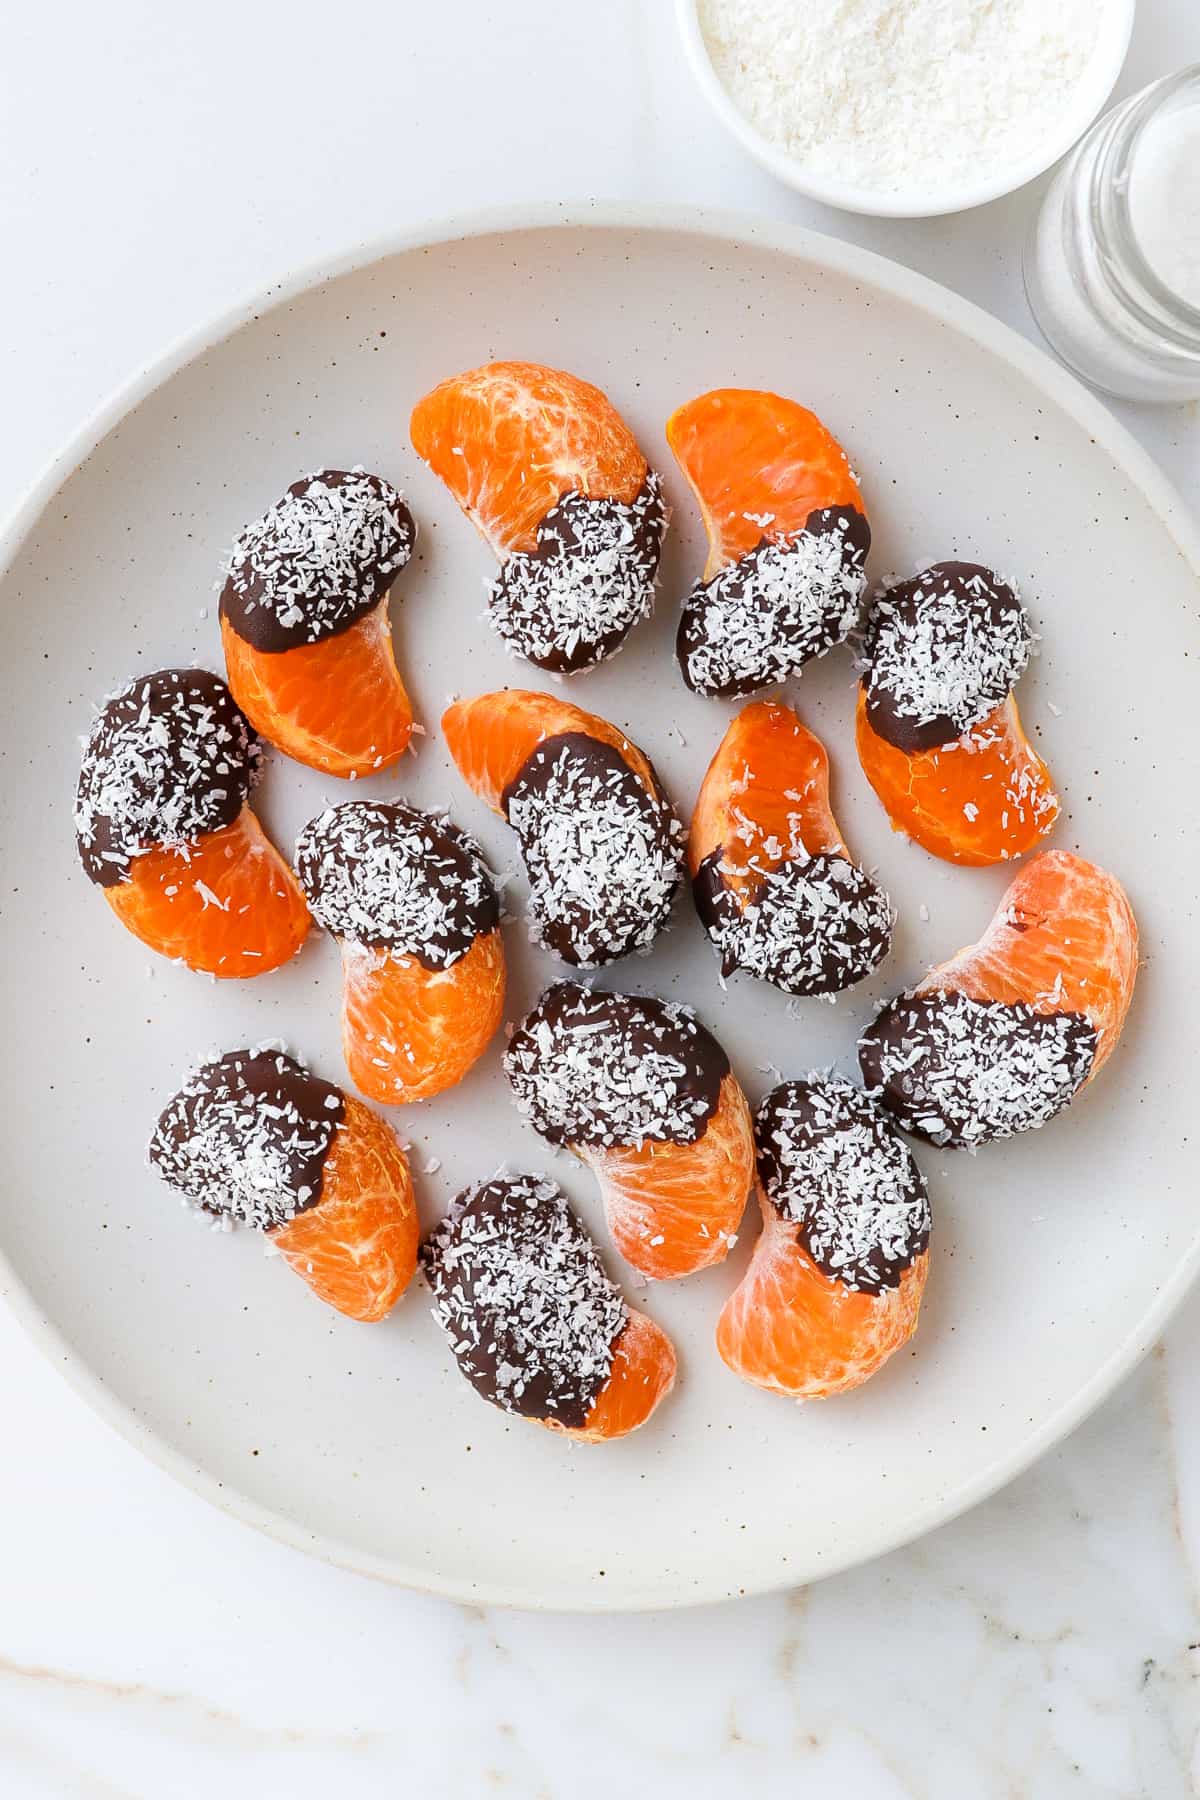 Chocolate covered orange pieces sprinkled with coconut on a plate.